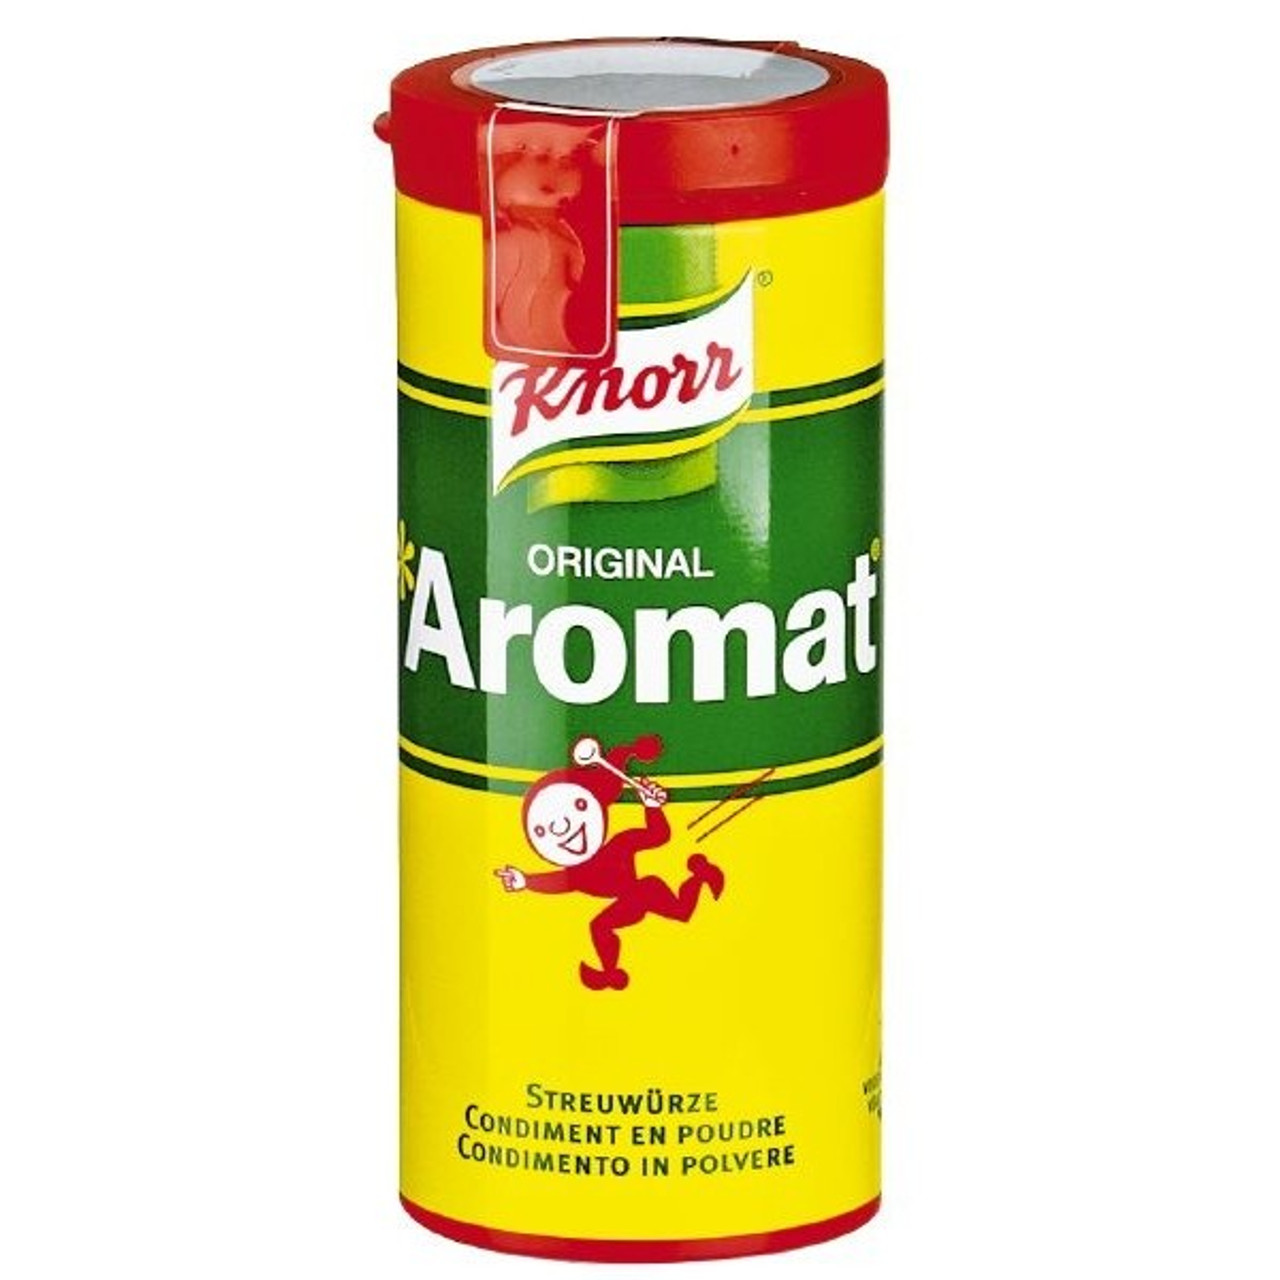 KNORR AROMAT WITH HERBS